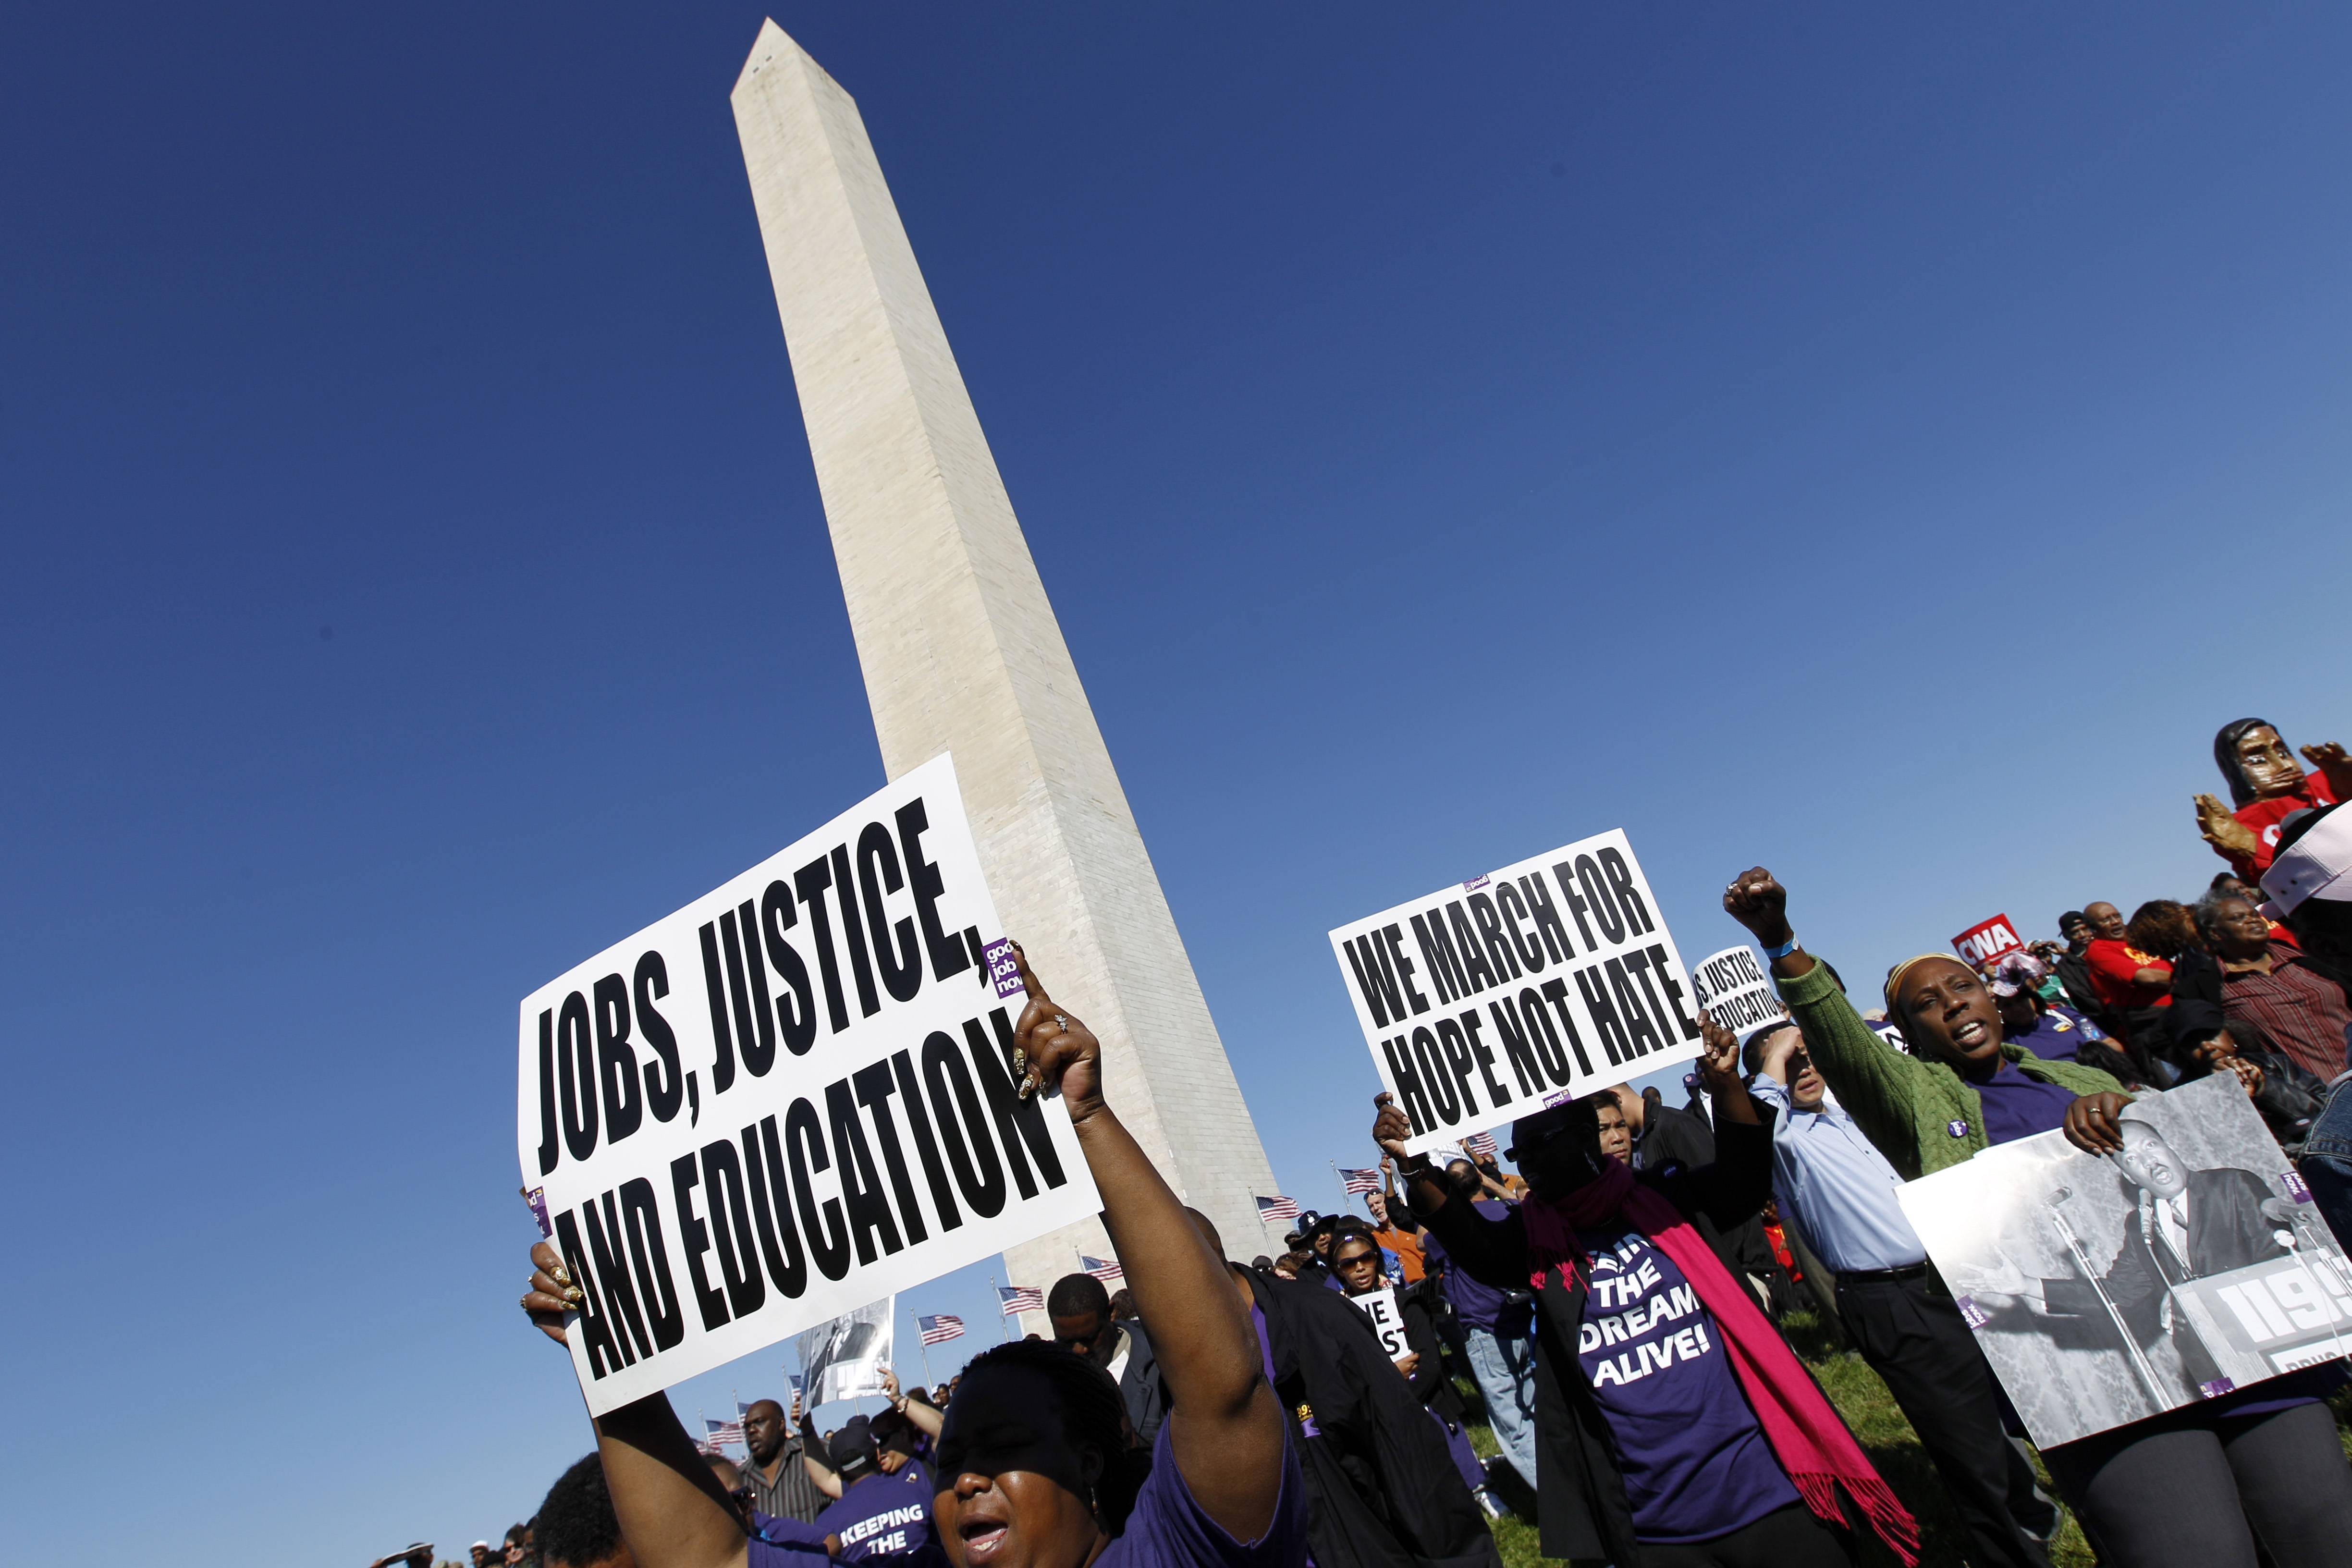 March for Jobs and Justice in Washington D.C. - In an effort to reflect their disapproval of the lack of jobs, hundreds of people marched from the Washington monument to the Martin Luther King Jr. Memorial on Saturday in a rally and march headed by Rev. Al Sharpton’s National Action Network and other civil rights organizations.(Photo: ASSOCIATED PRESSAP)